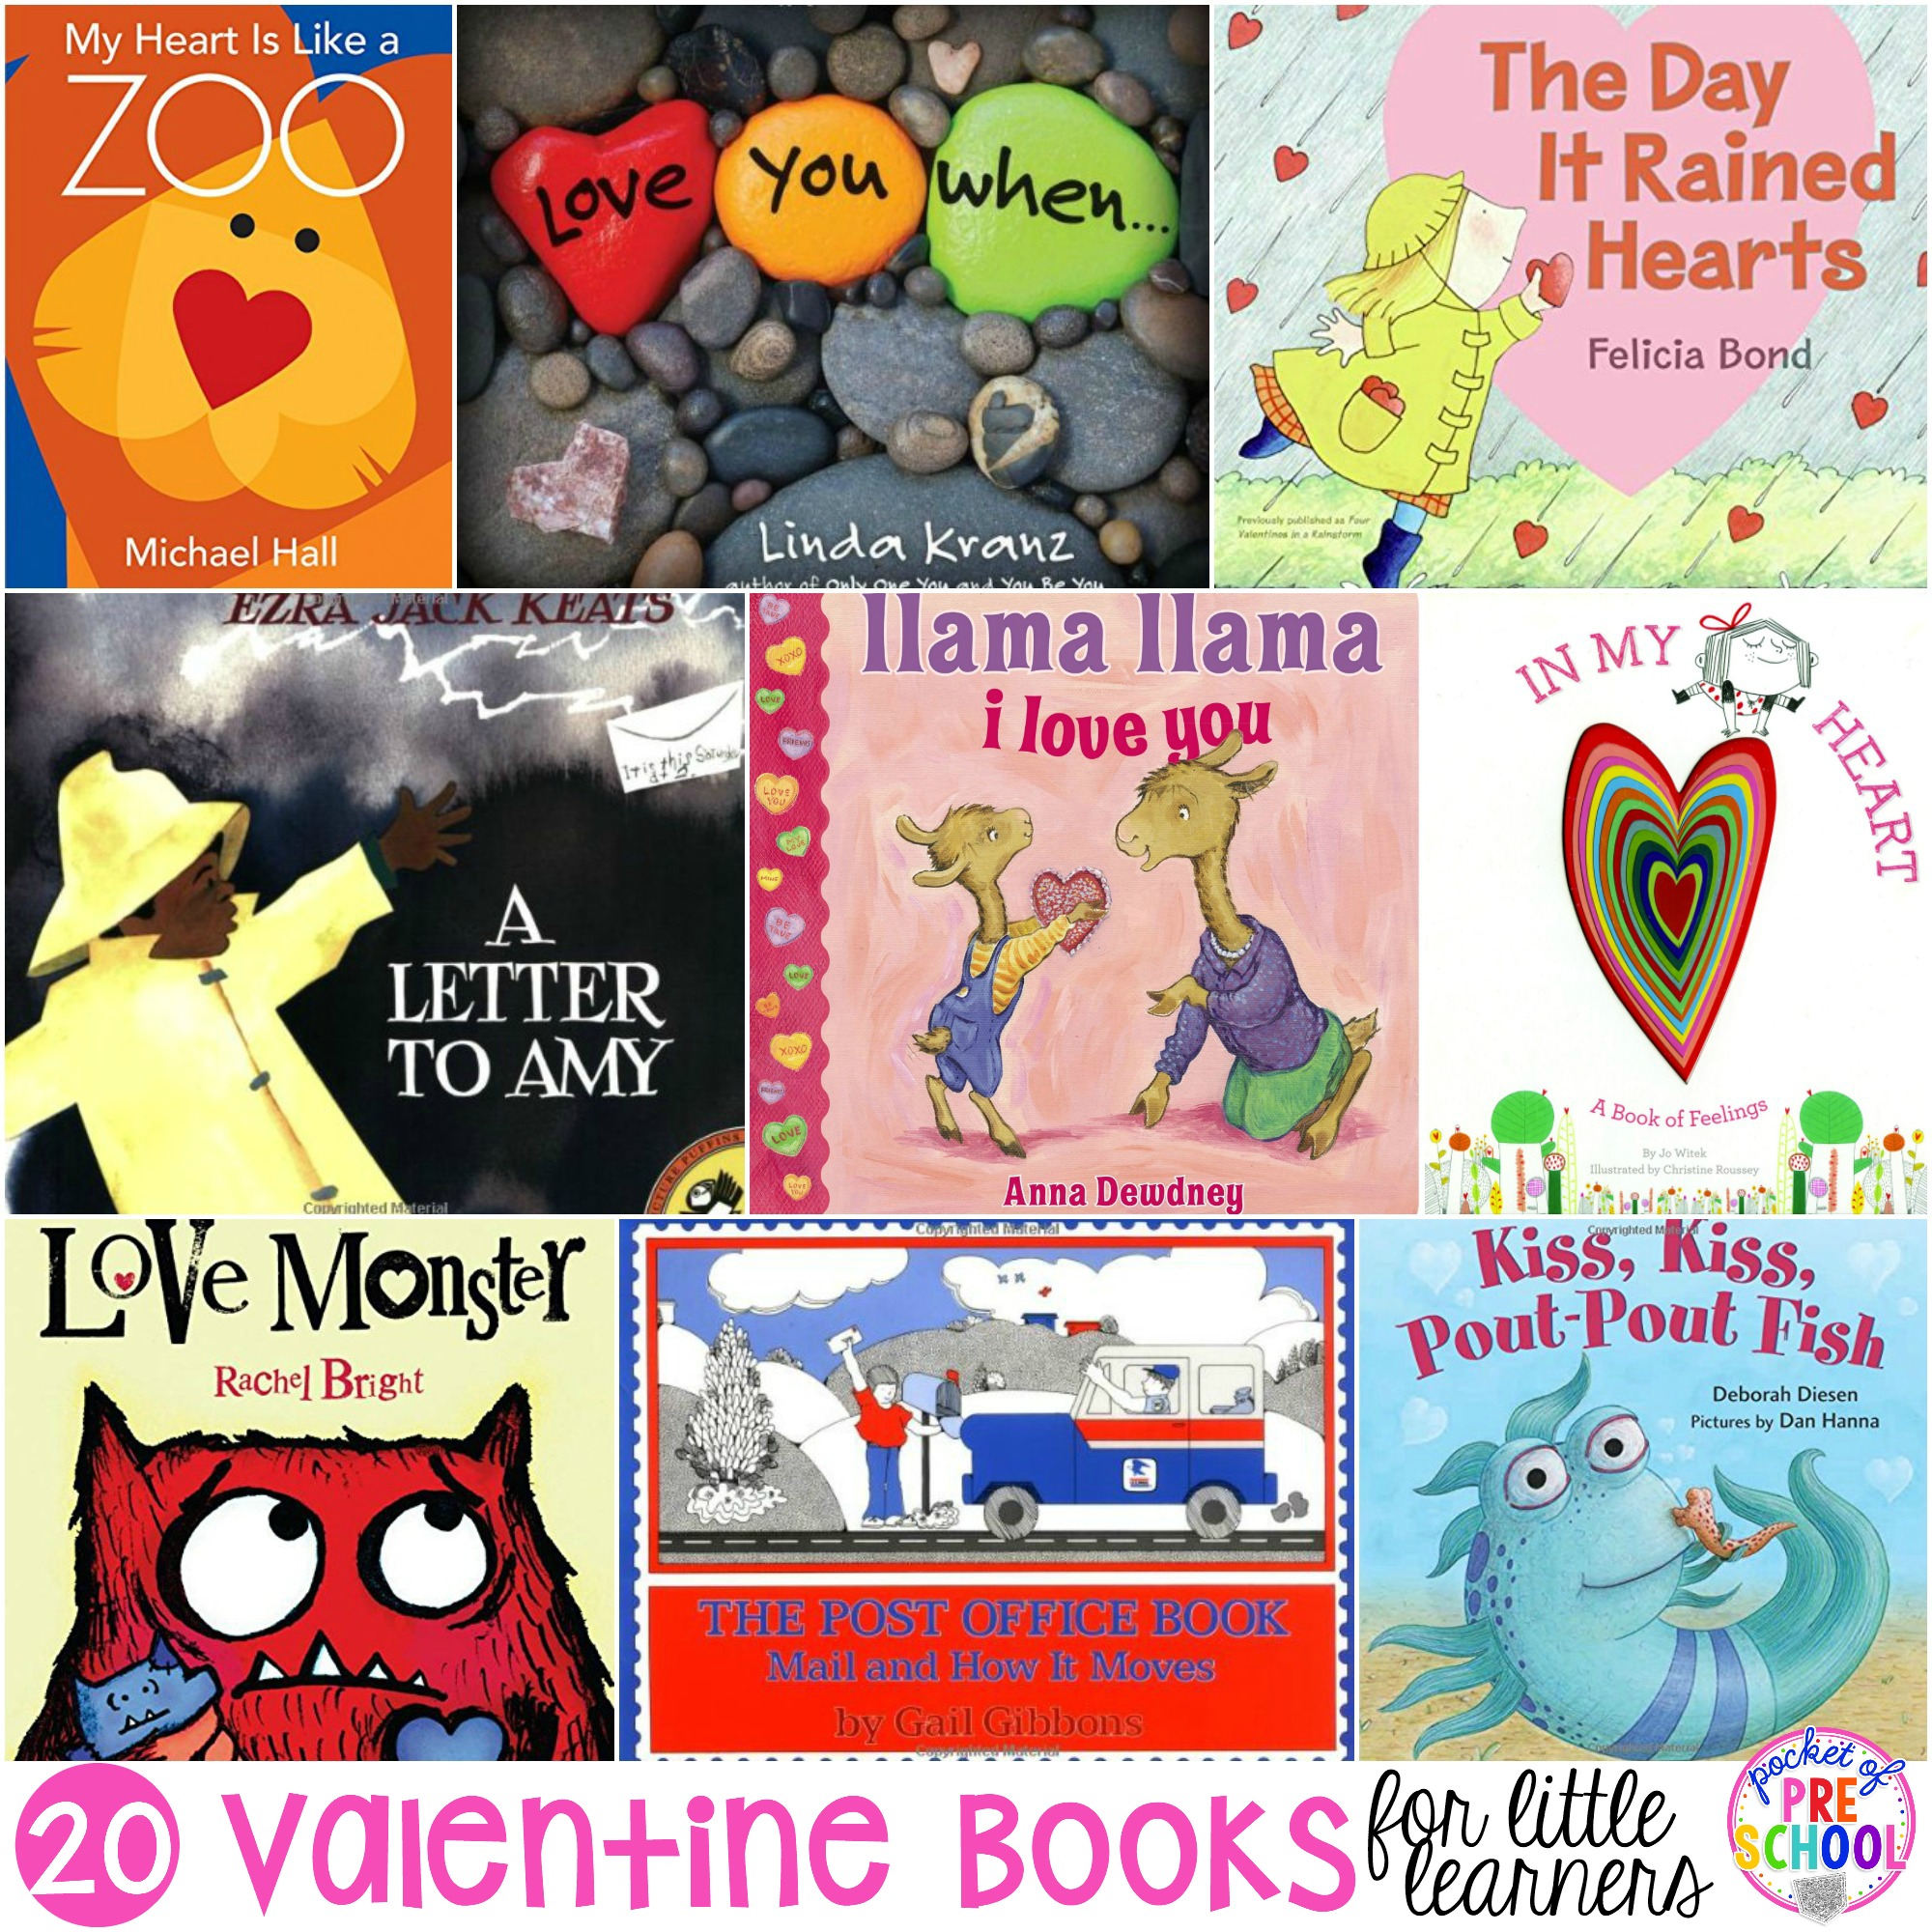 My favorite Valentine's Day books for little learners (preschool, pre-k, and kindergarten). Books to teach about love, friendship, letters, and the mail.